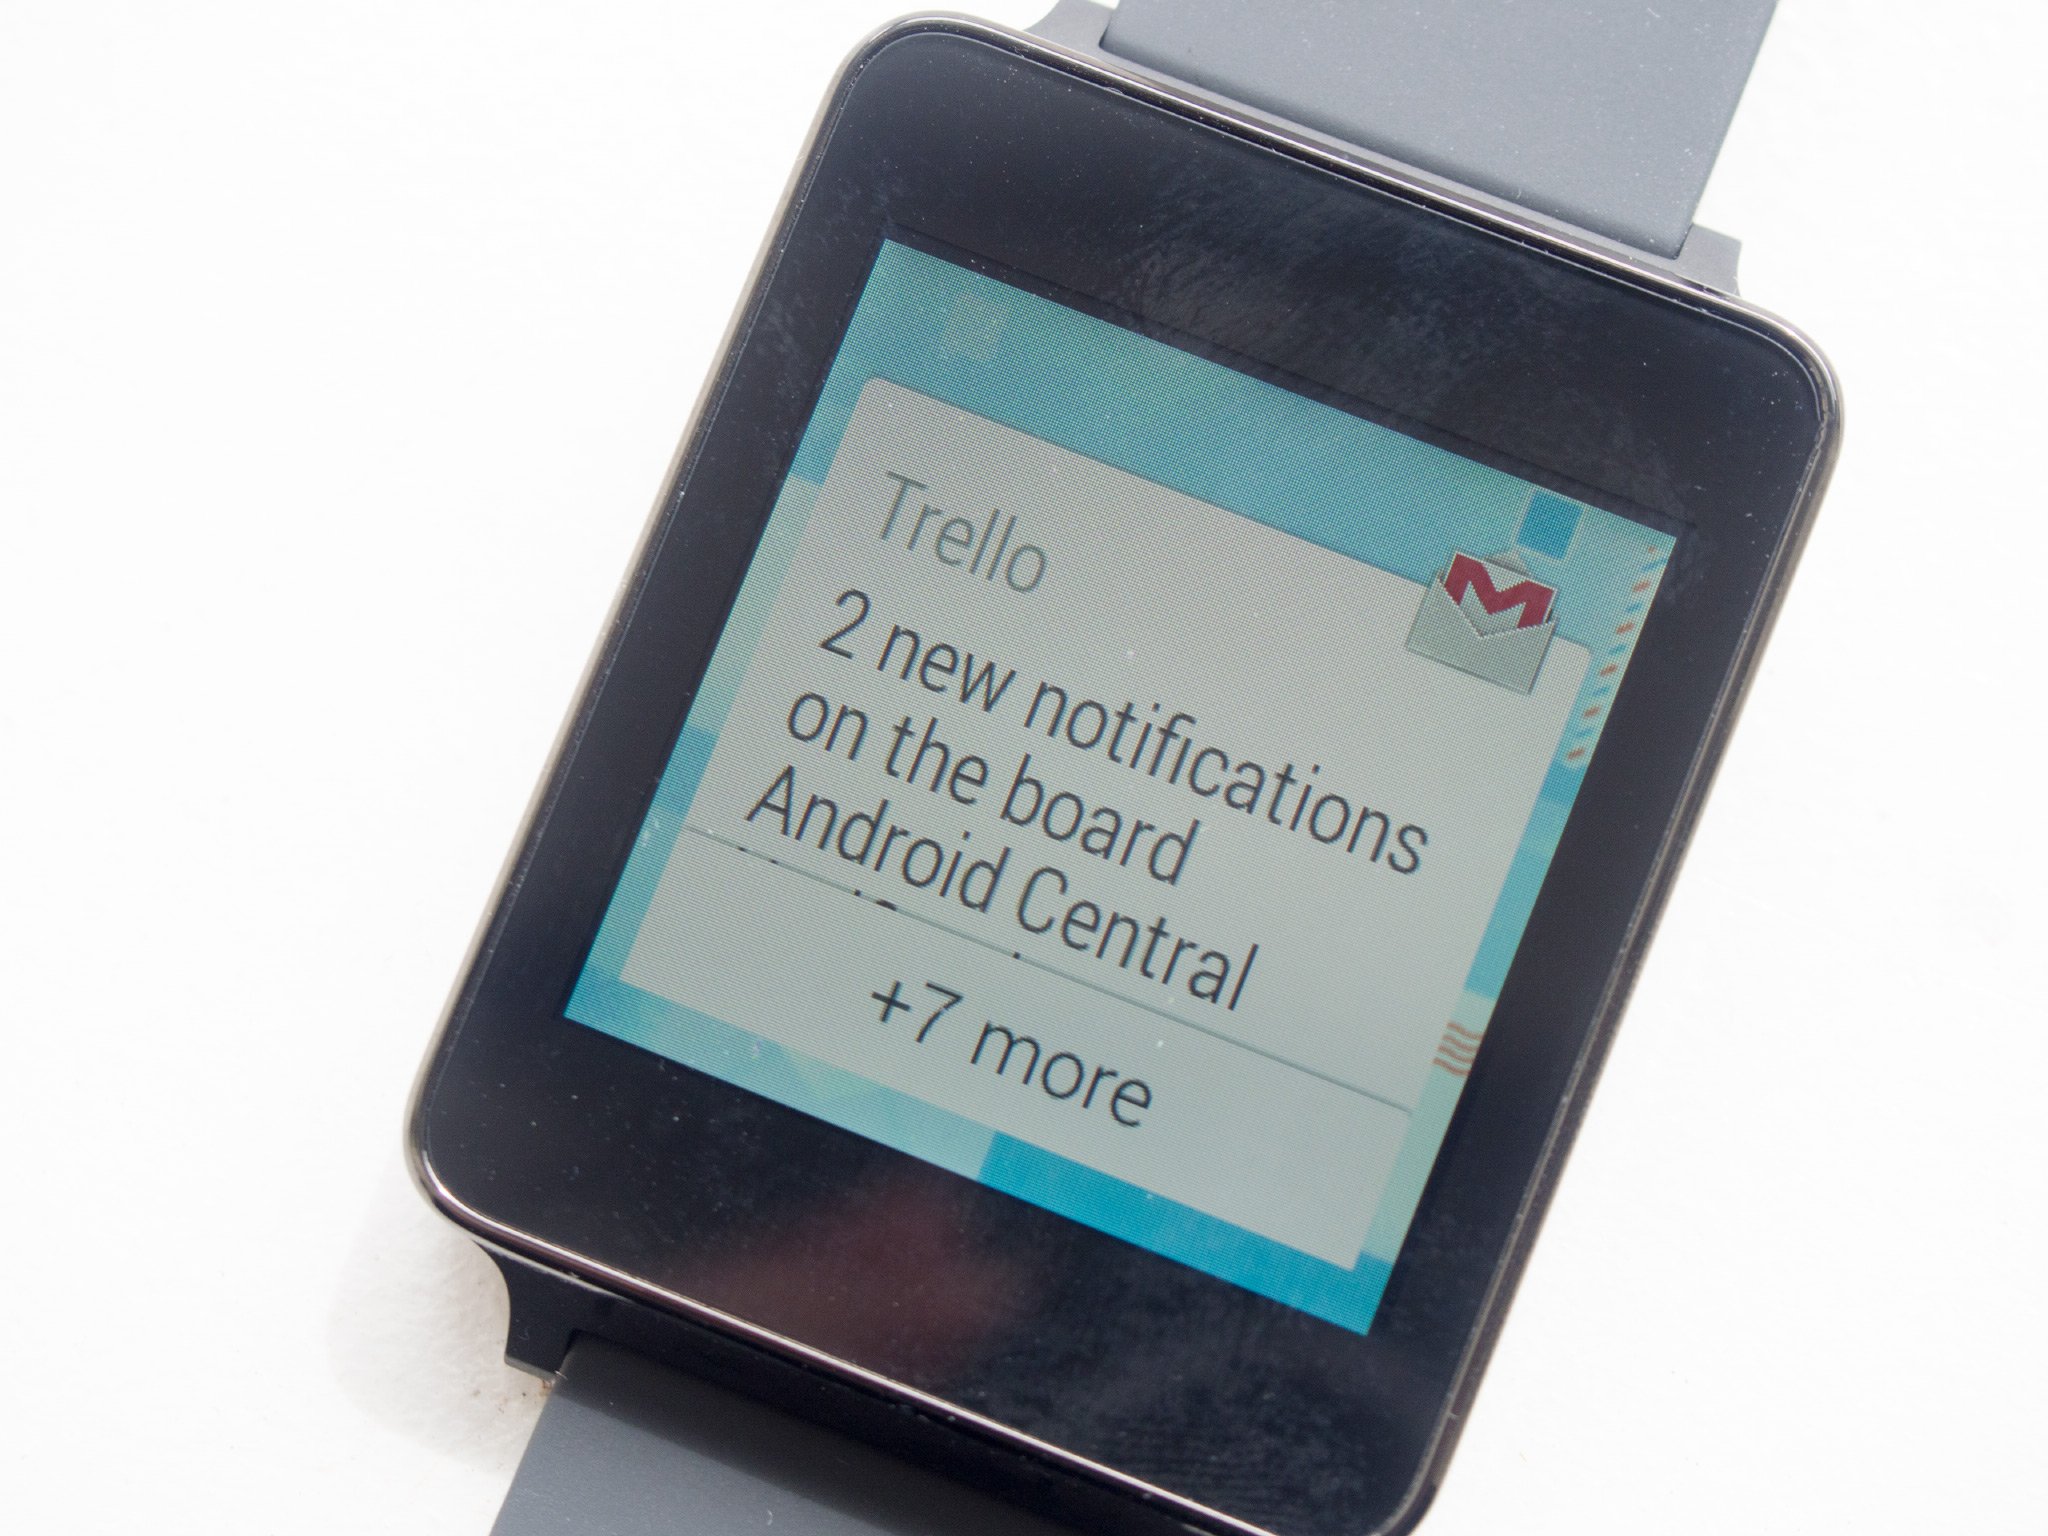 Gmail on Android Wear